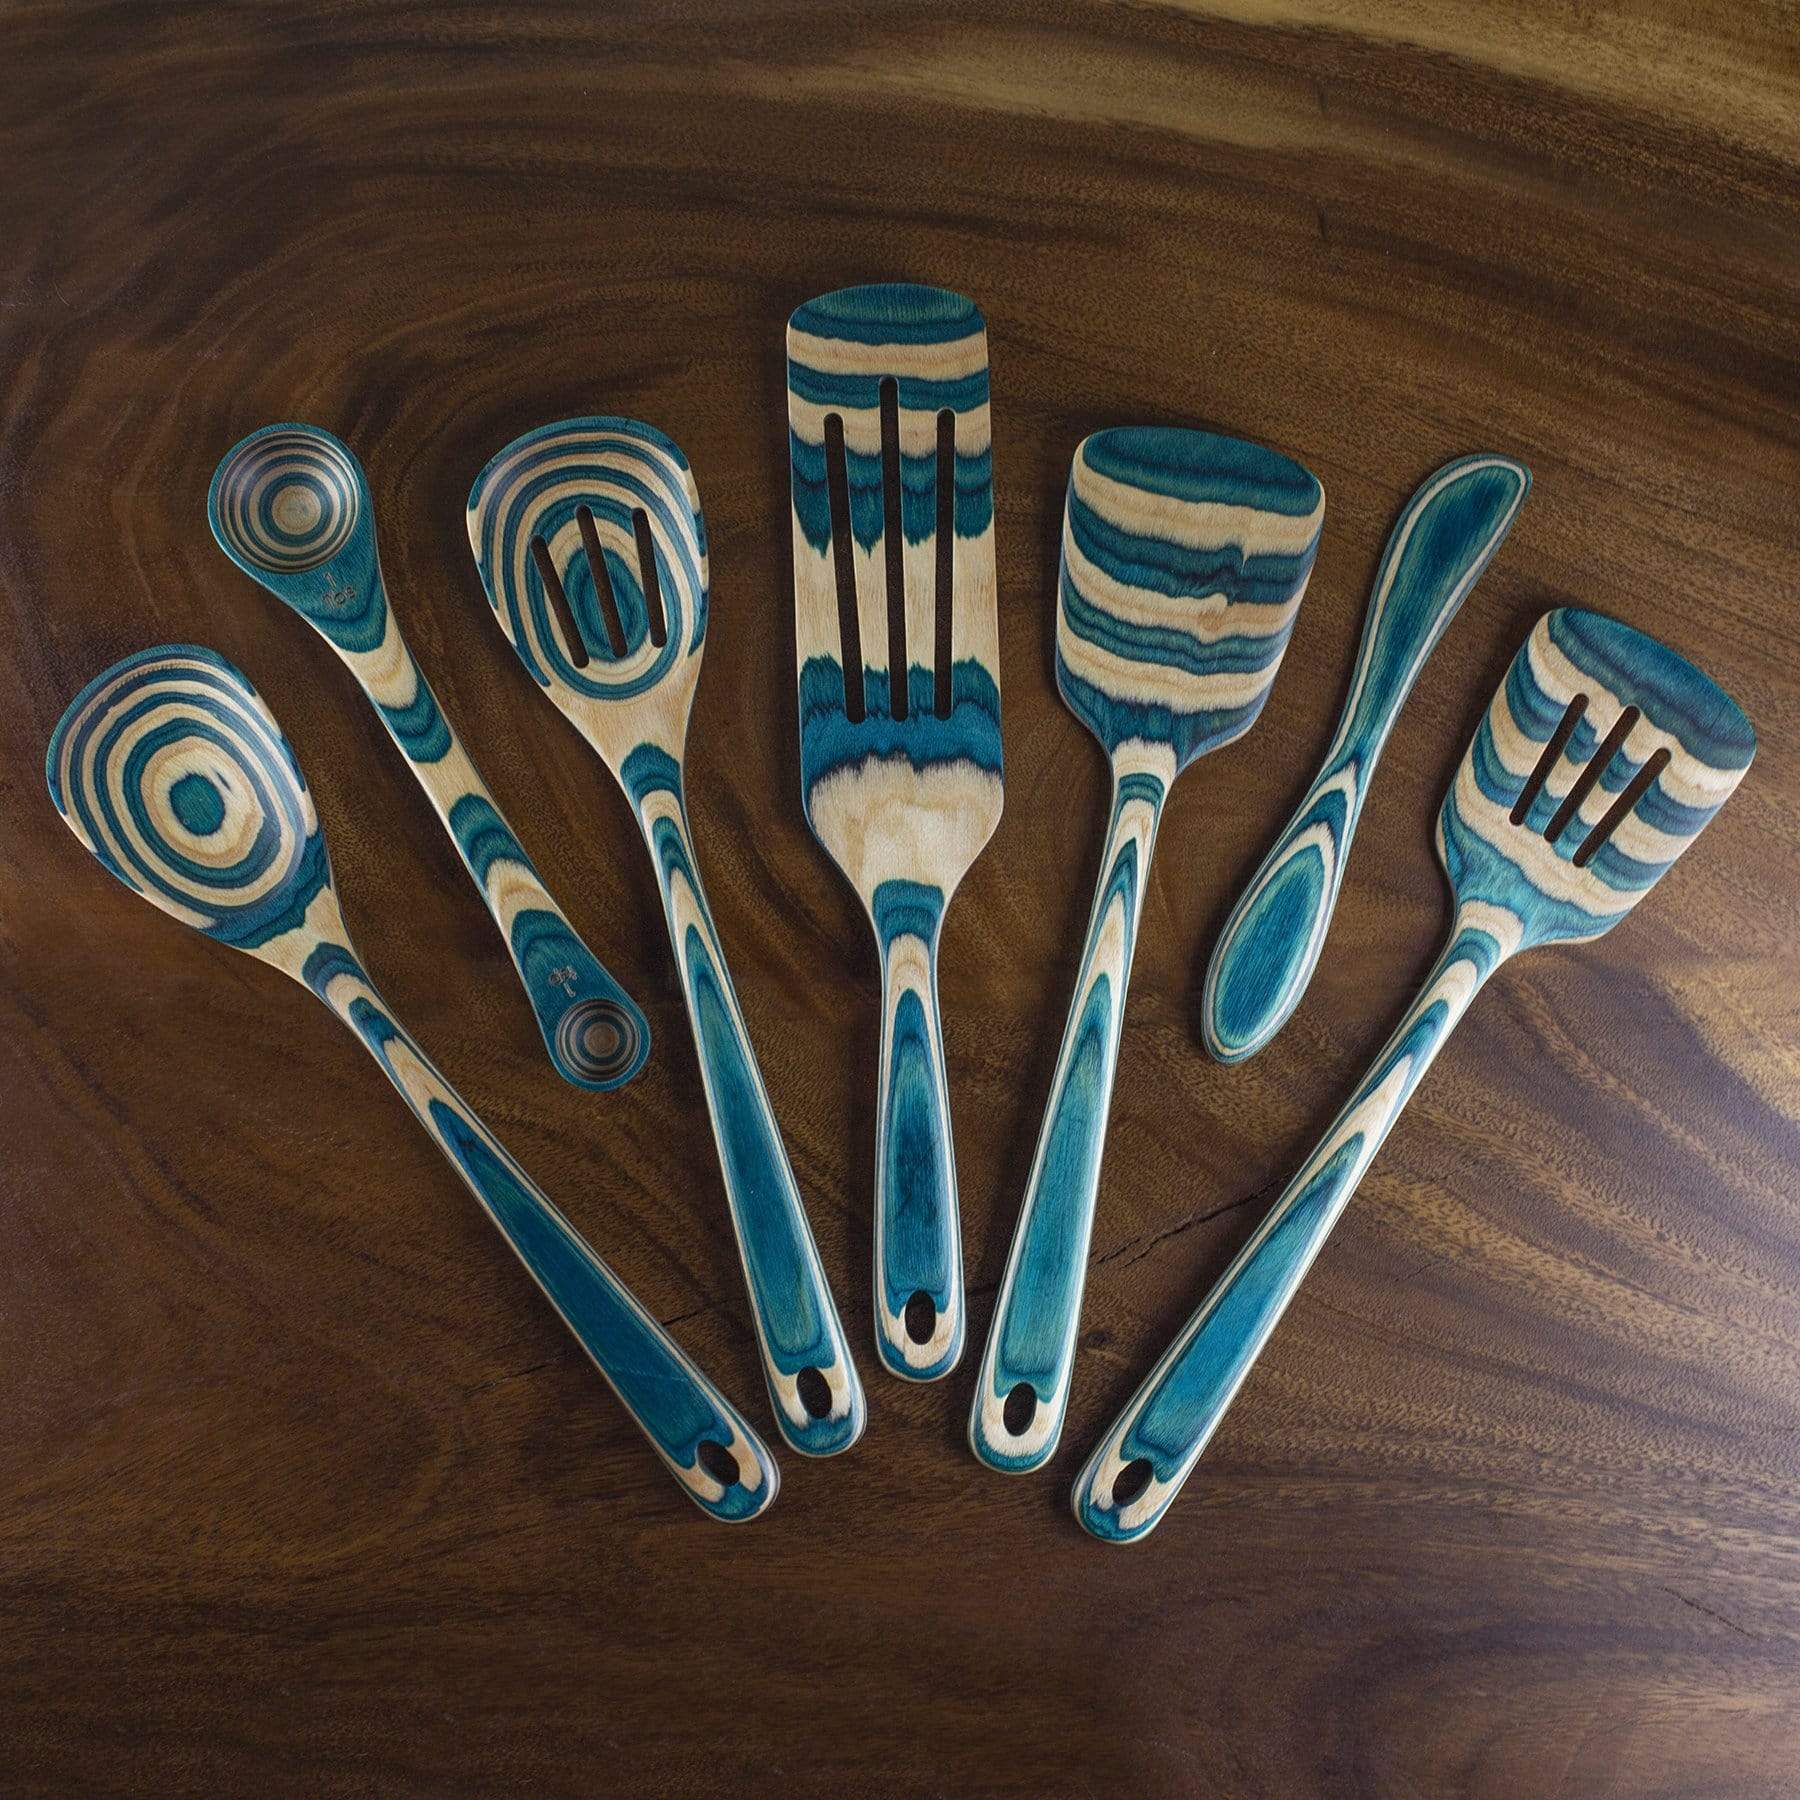 Wooden Kitchen Cooking Utensils, 7 Pcs Wooden Spoons and Spatula